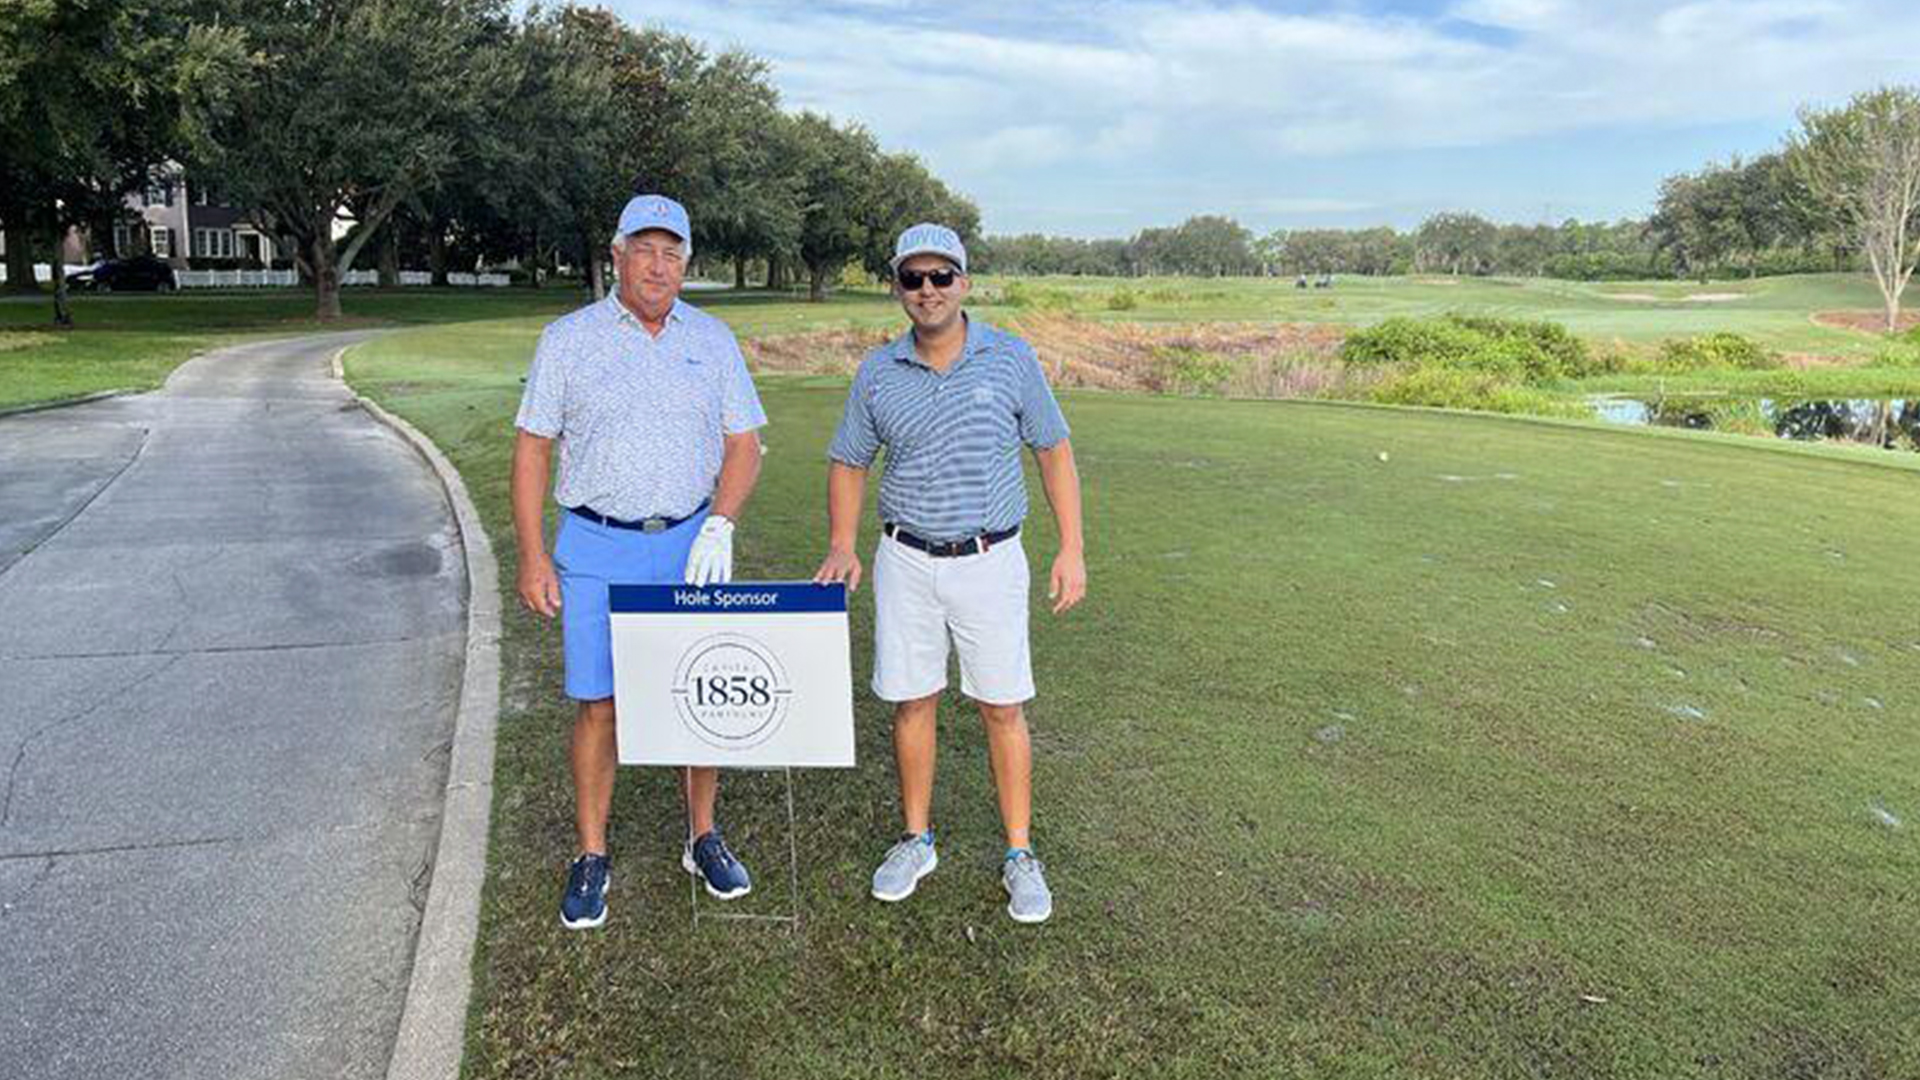 1858 Capital Partners Sponsors 2nd Annual Industry Golf